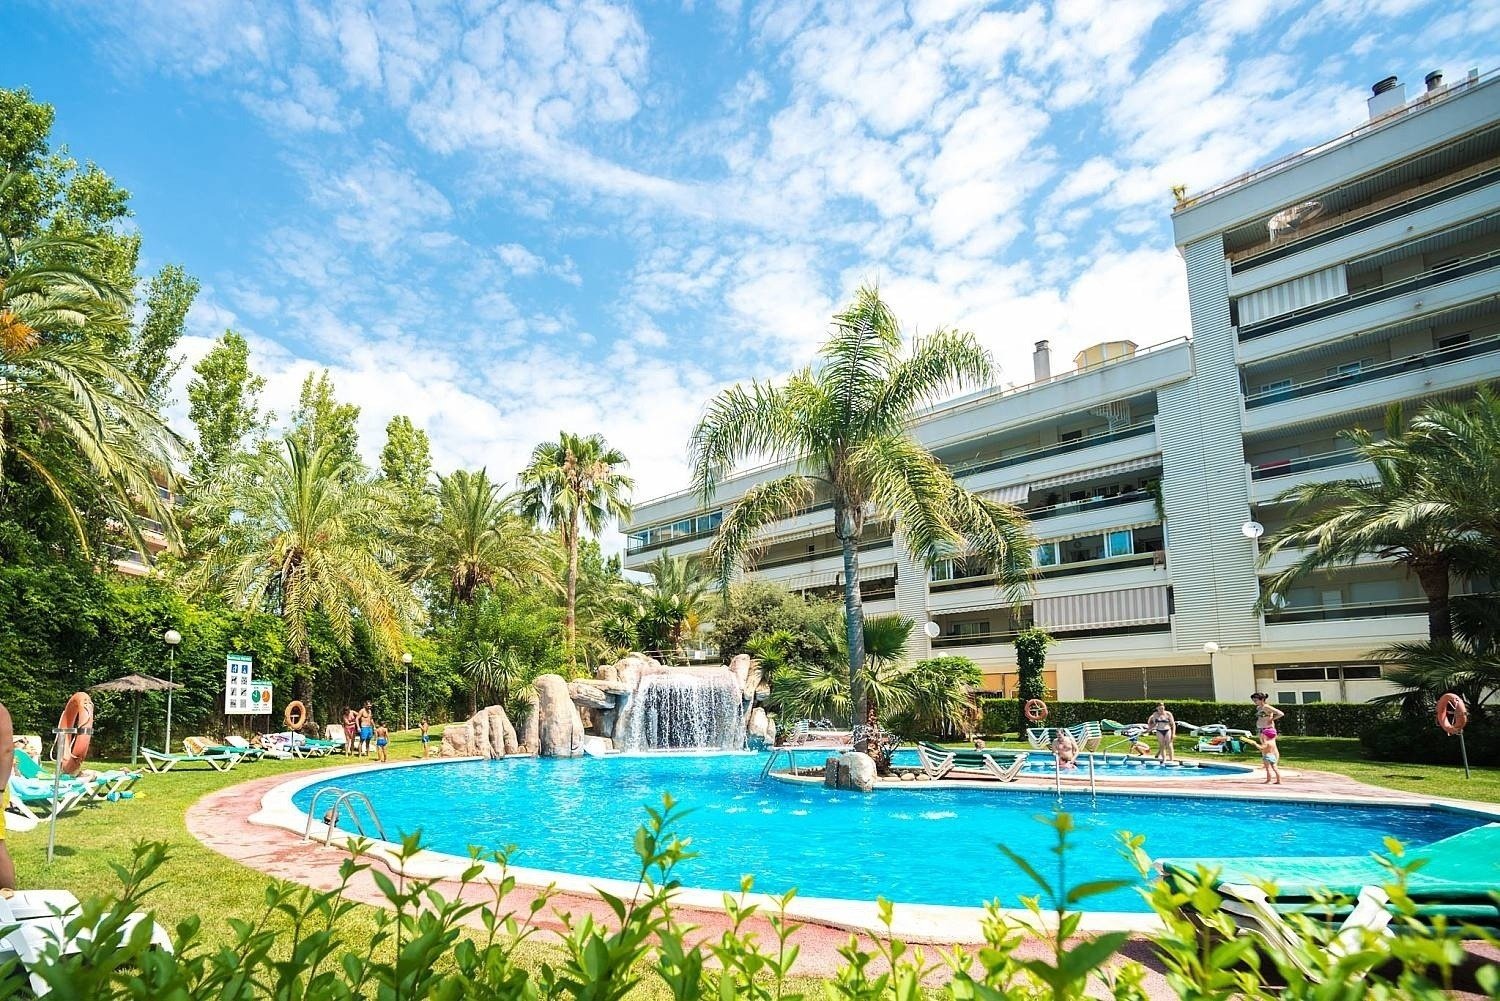 Panoramic view of the outdoor pool of the Ona Jardines Paraisol hotel in Salou